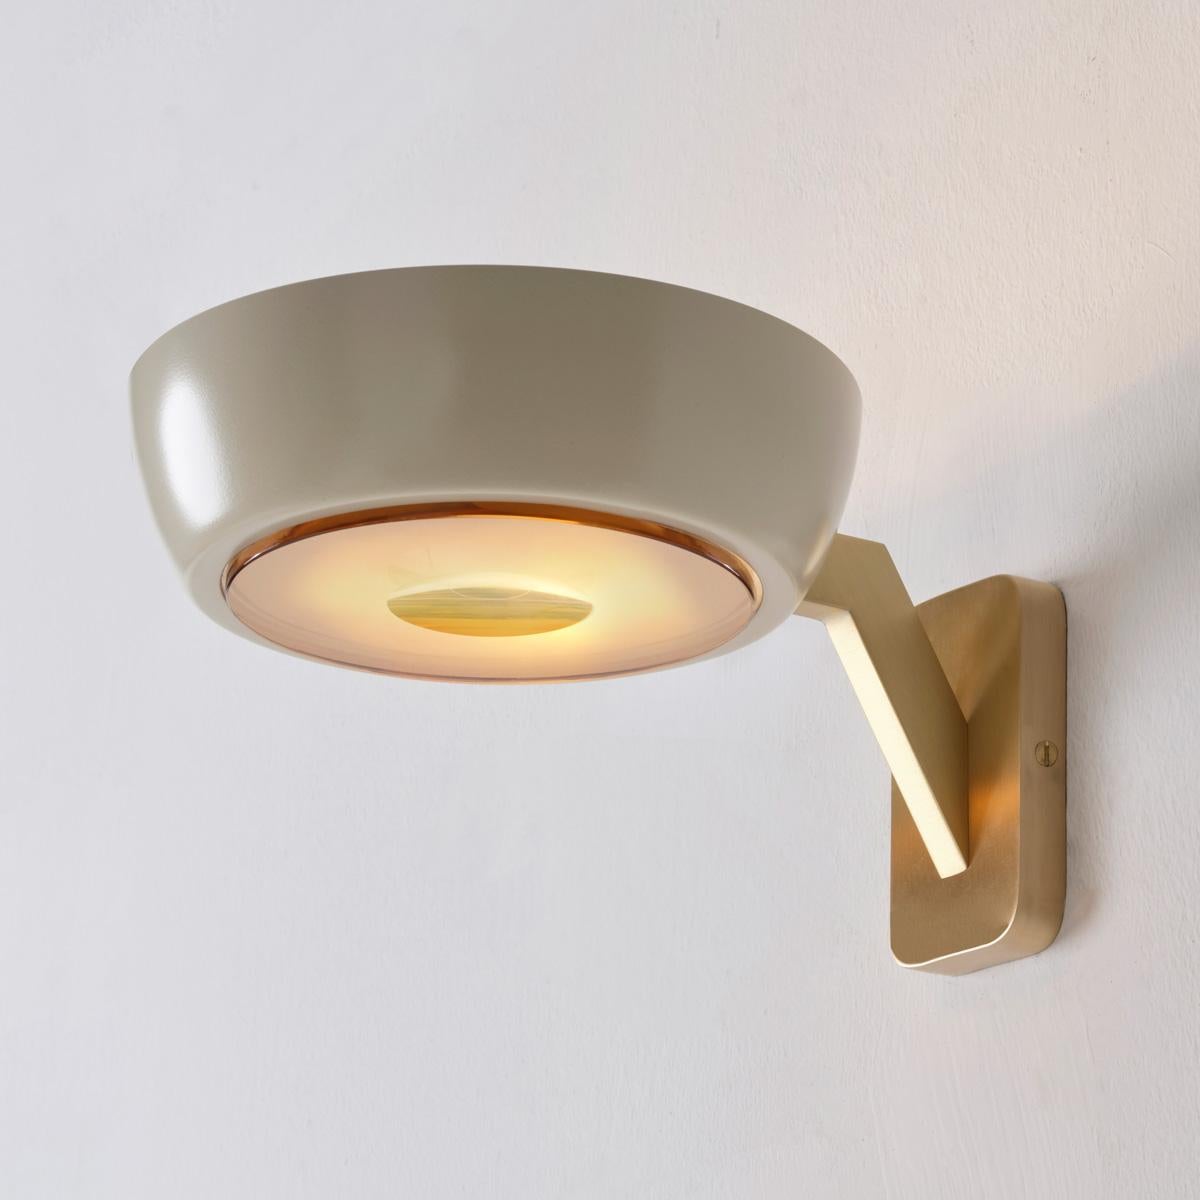 The Rose Single wall light featuring a large shade on an angled brass frame, lends itself to customization with the ability to change the shade color, glass diffuser and frame finish. See the matching Rose ceiling lights and Rose Double wall light